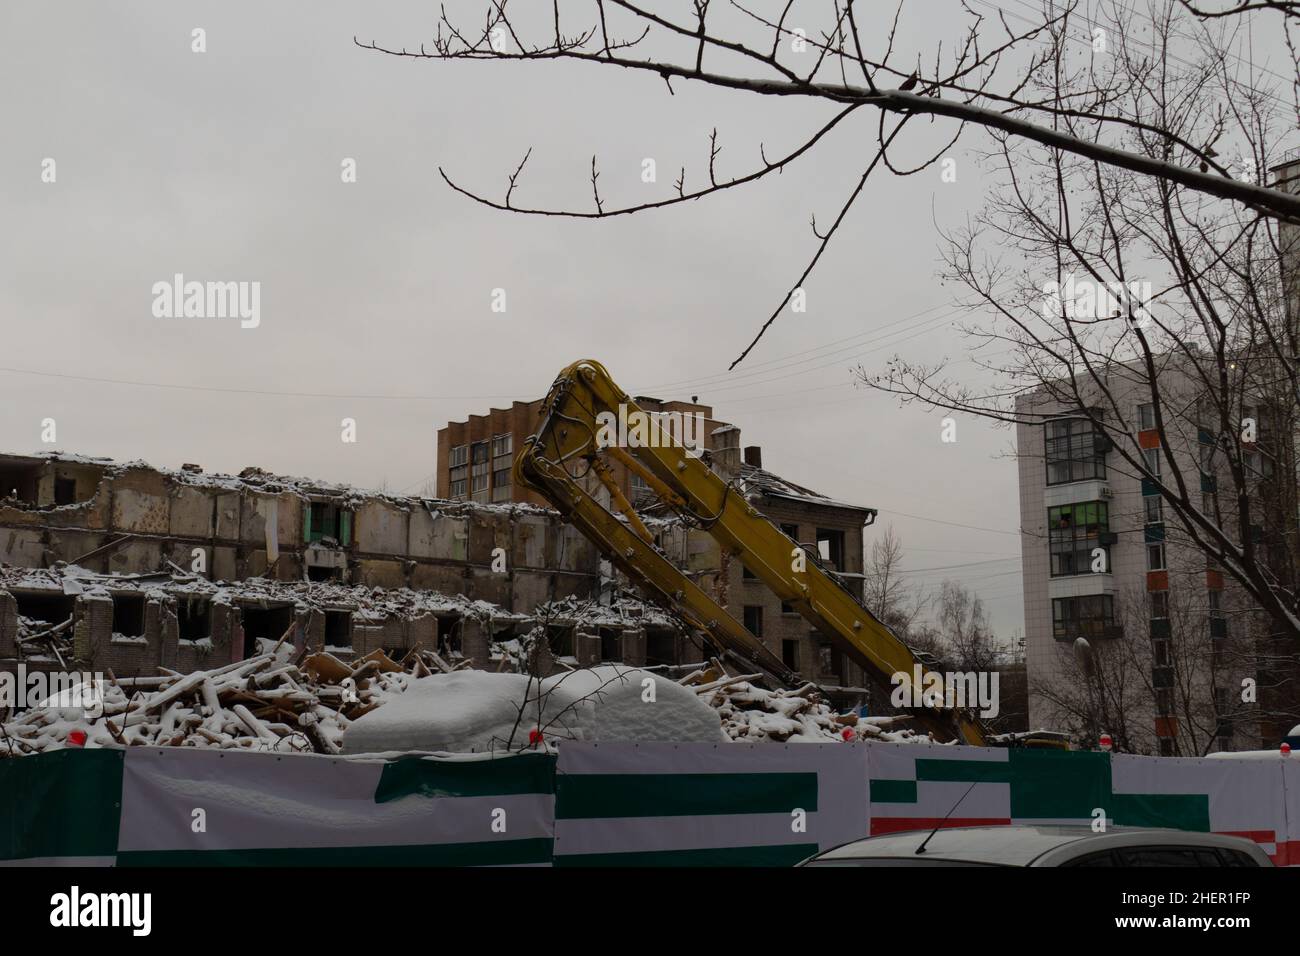 destroyed multi-storey residential building in the city 22 Stock Photo